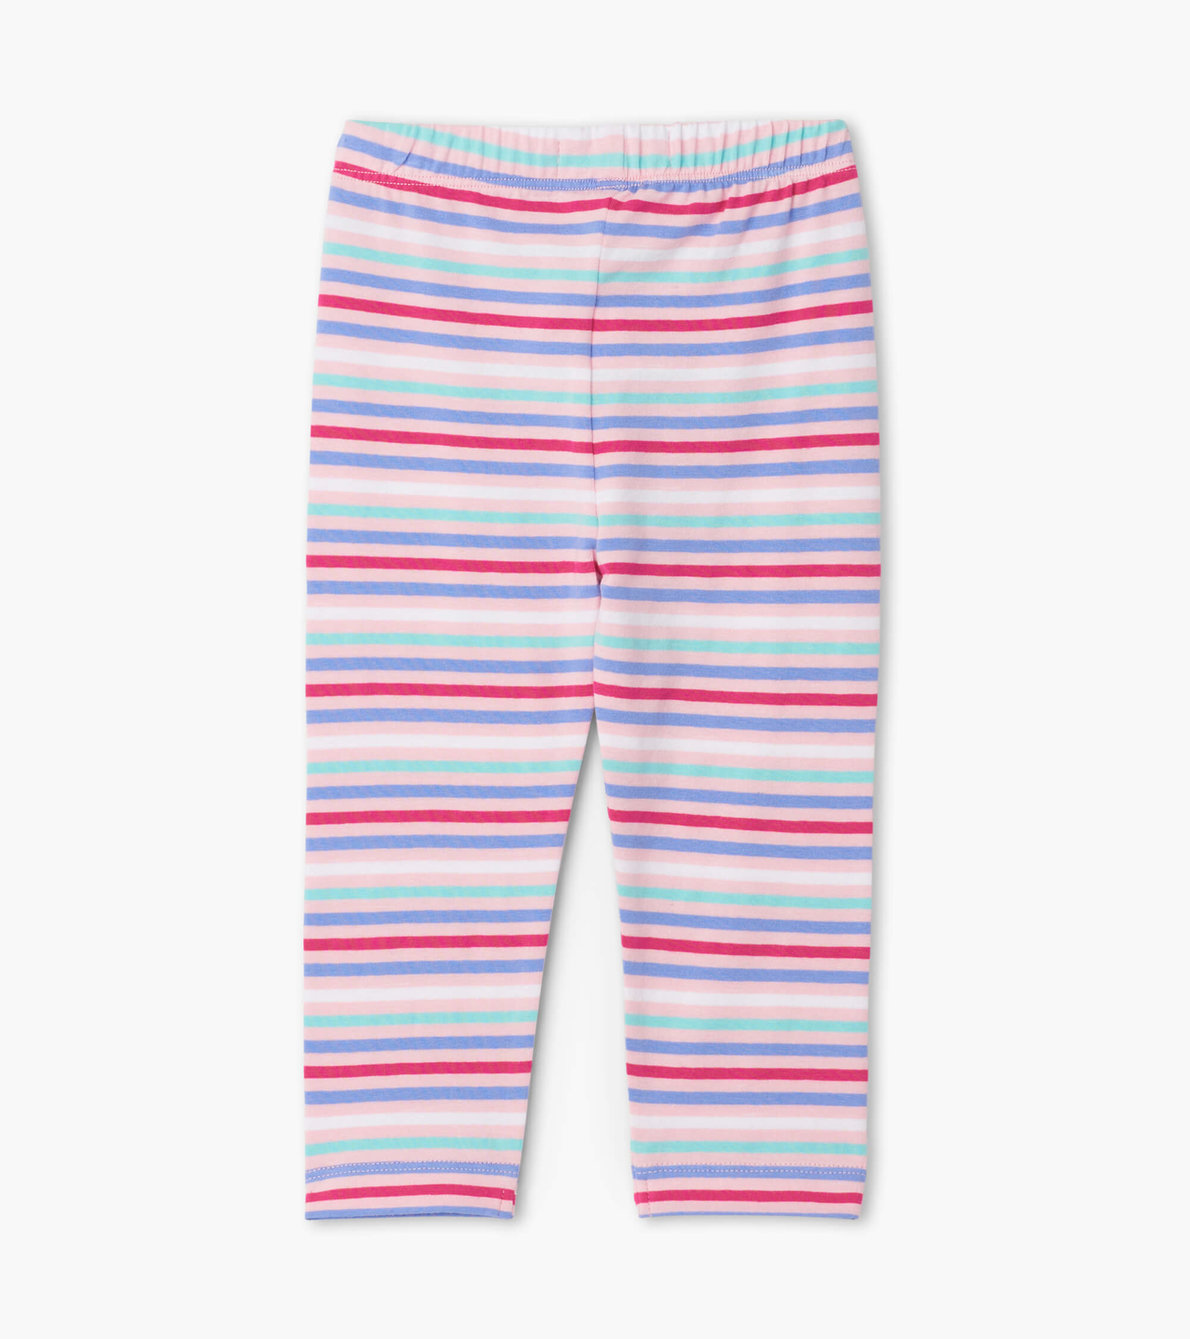 View larger image of Candy Stripes Baby Leggings